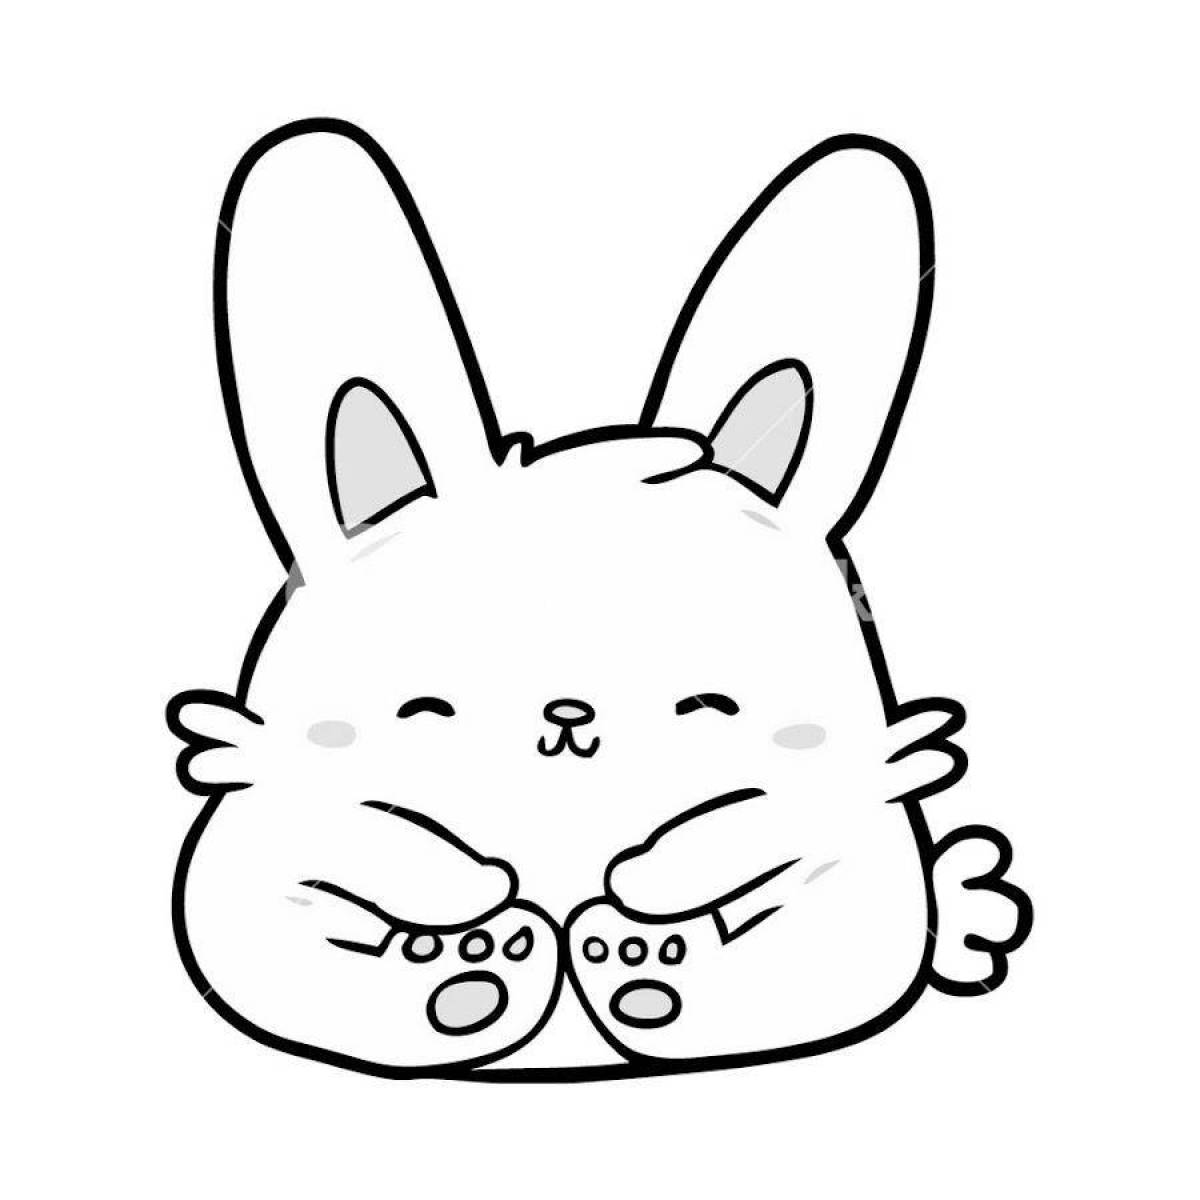 Bright rabbit and cat coloring pages